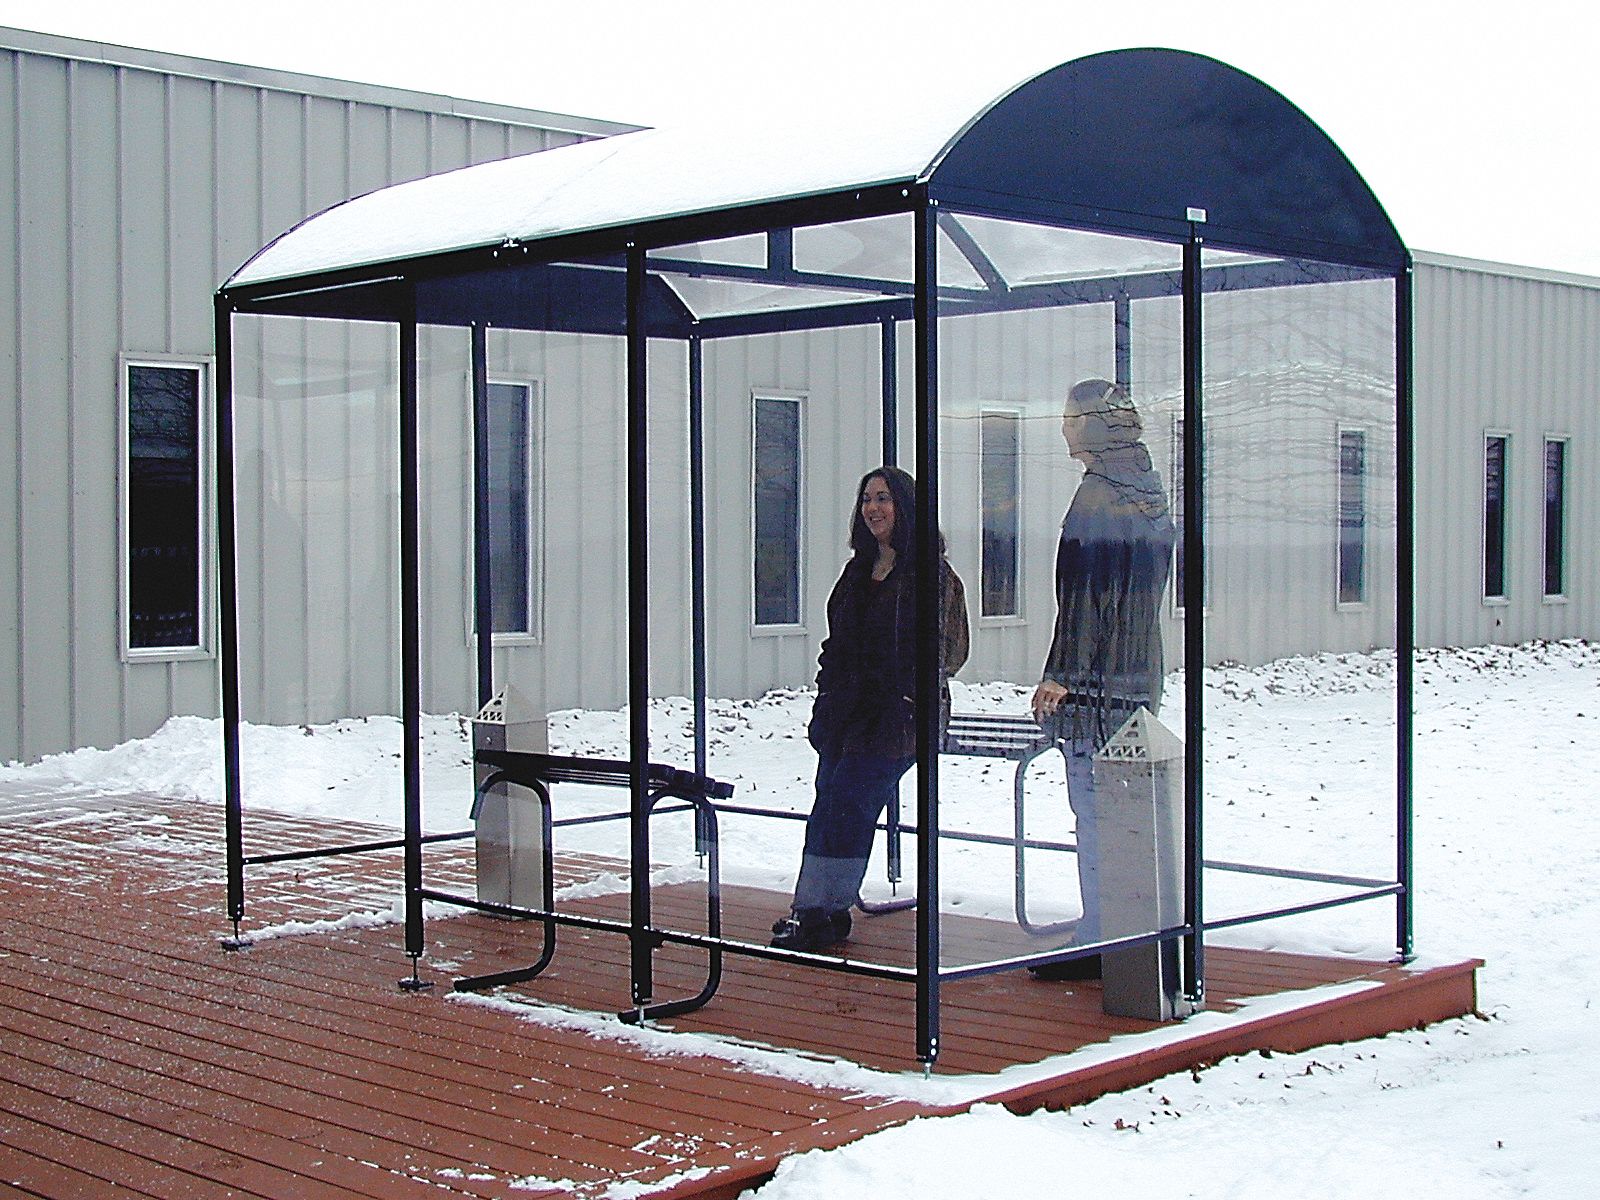 Smoking Shelter: 3 Sides, 165 in x 84 in x 95 in, Aluminum, Black, Includes Seating, Unassembled